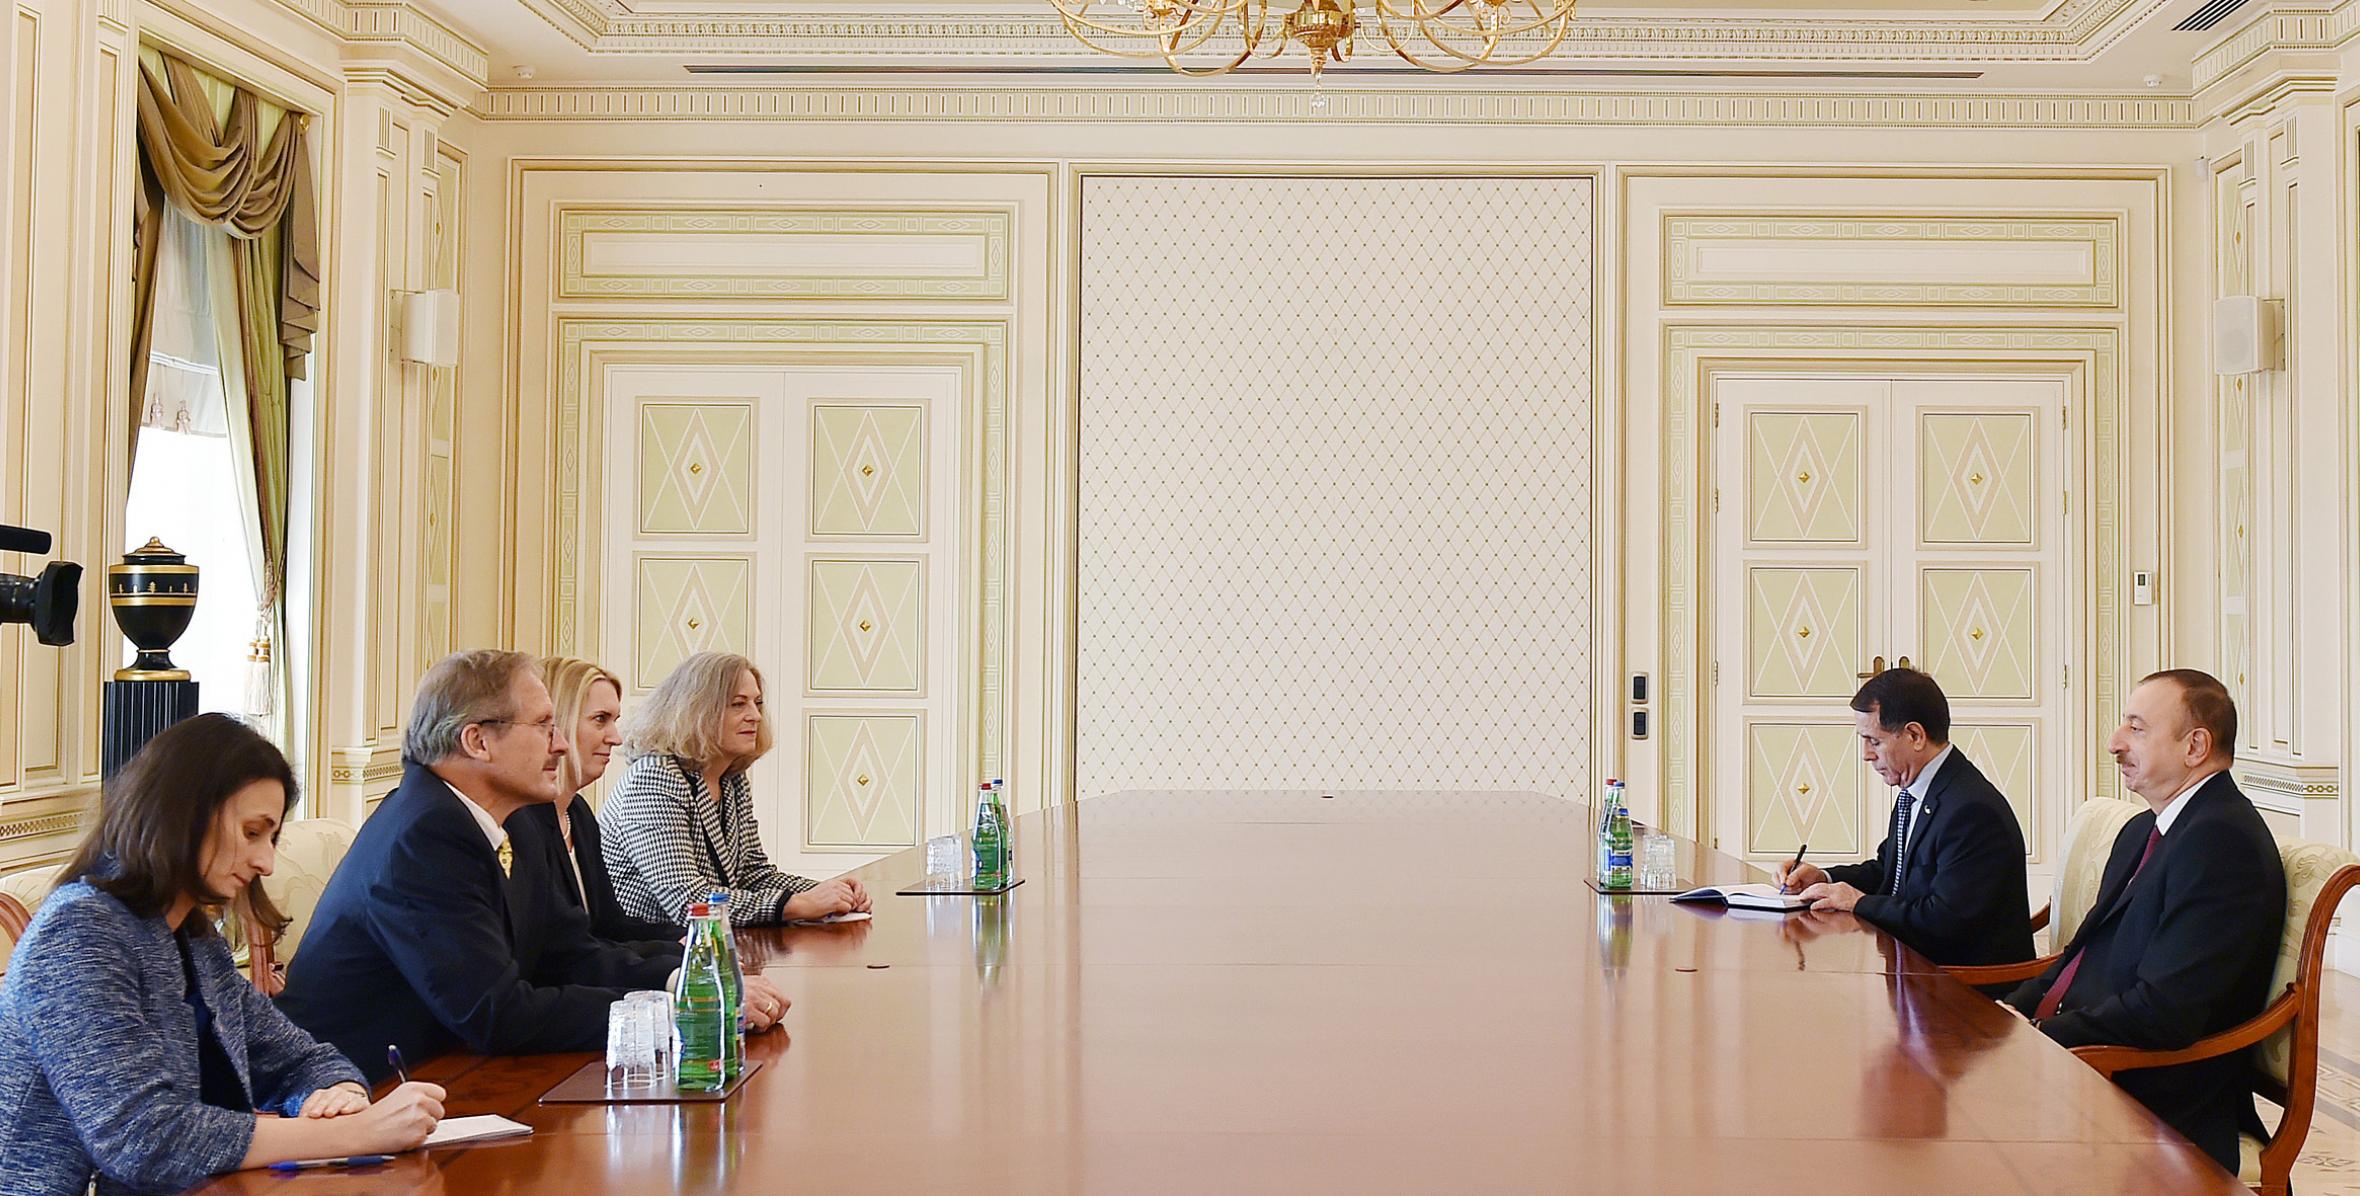 Ilham Aliyev received a delegation led by US Deputy Assistant Secretary of State for European and Eurasian Affairs